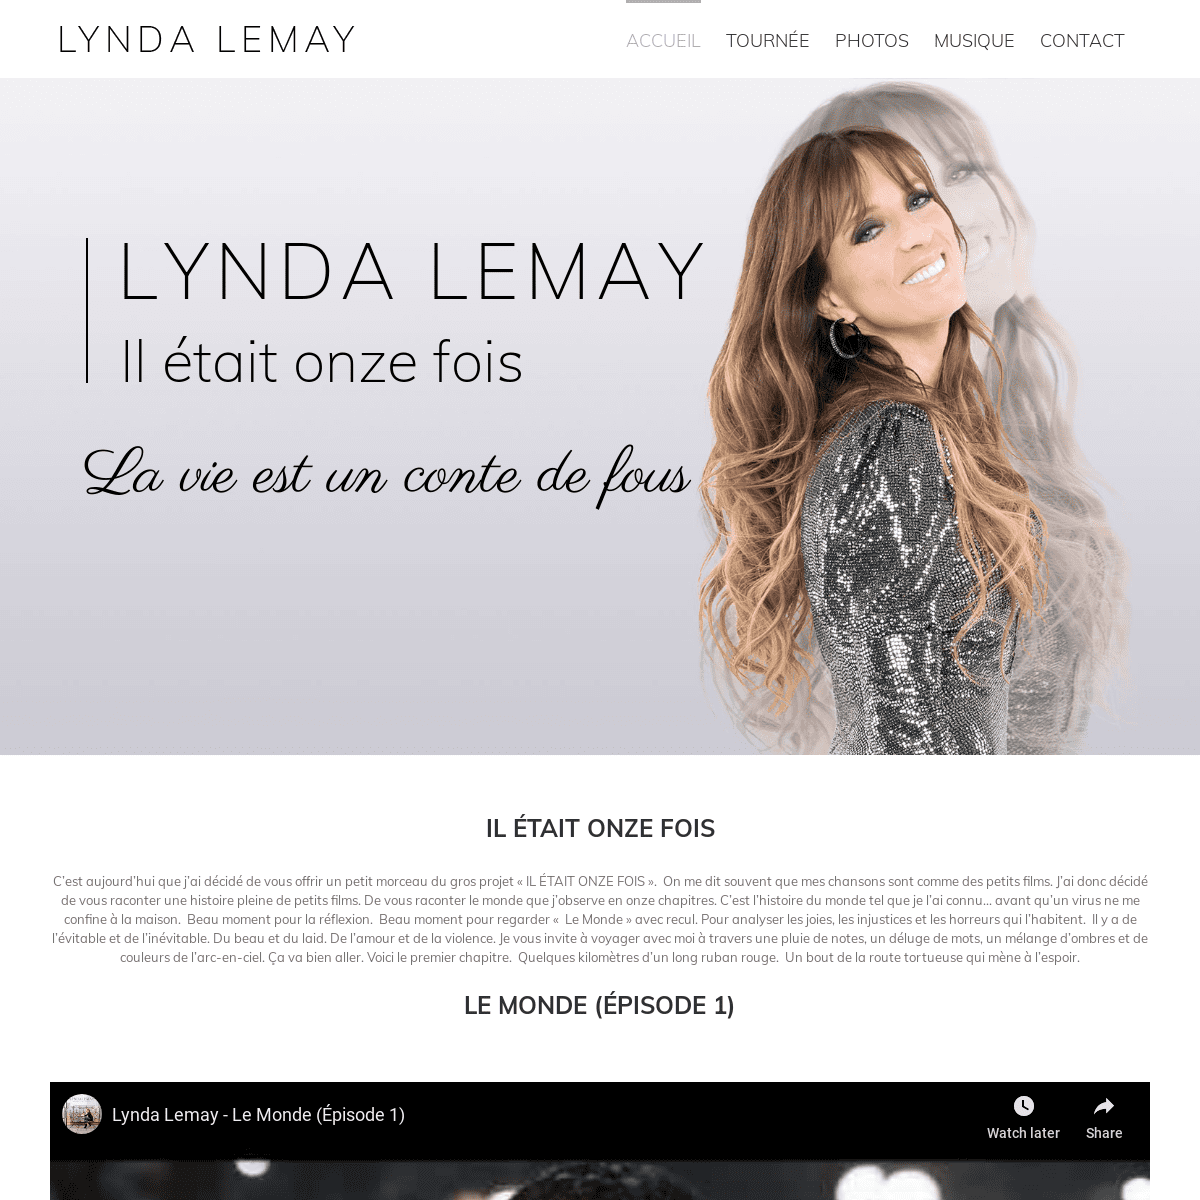 A complete backup of lyndalemay.com